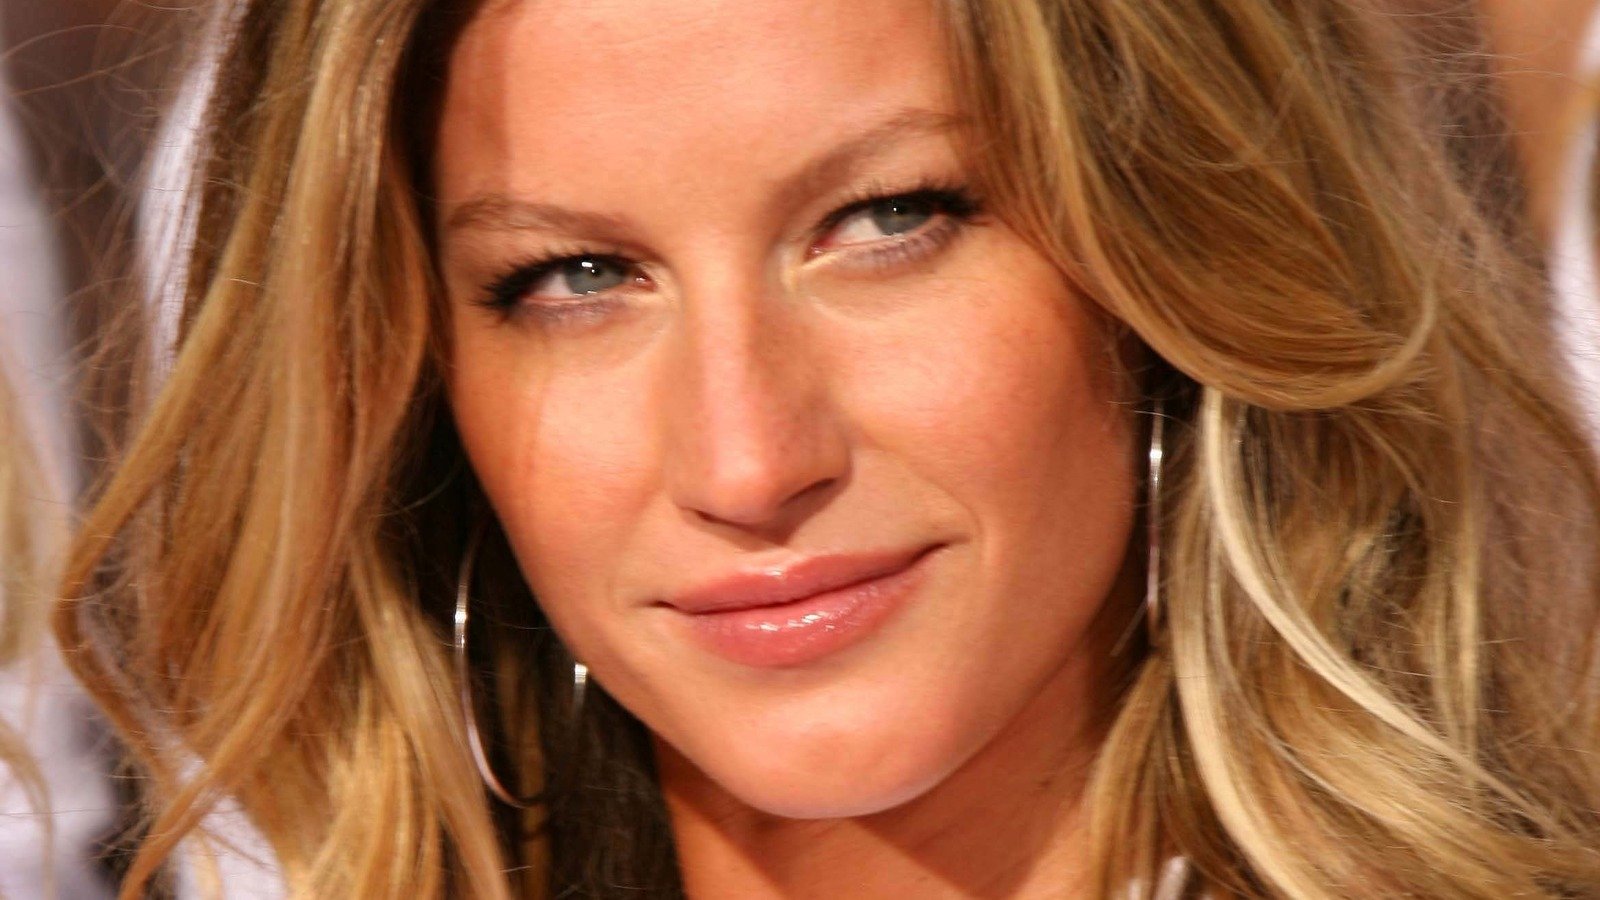 Gisele Bundchen: How She Became One Of The World's Top Models - The List